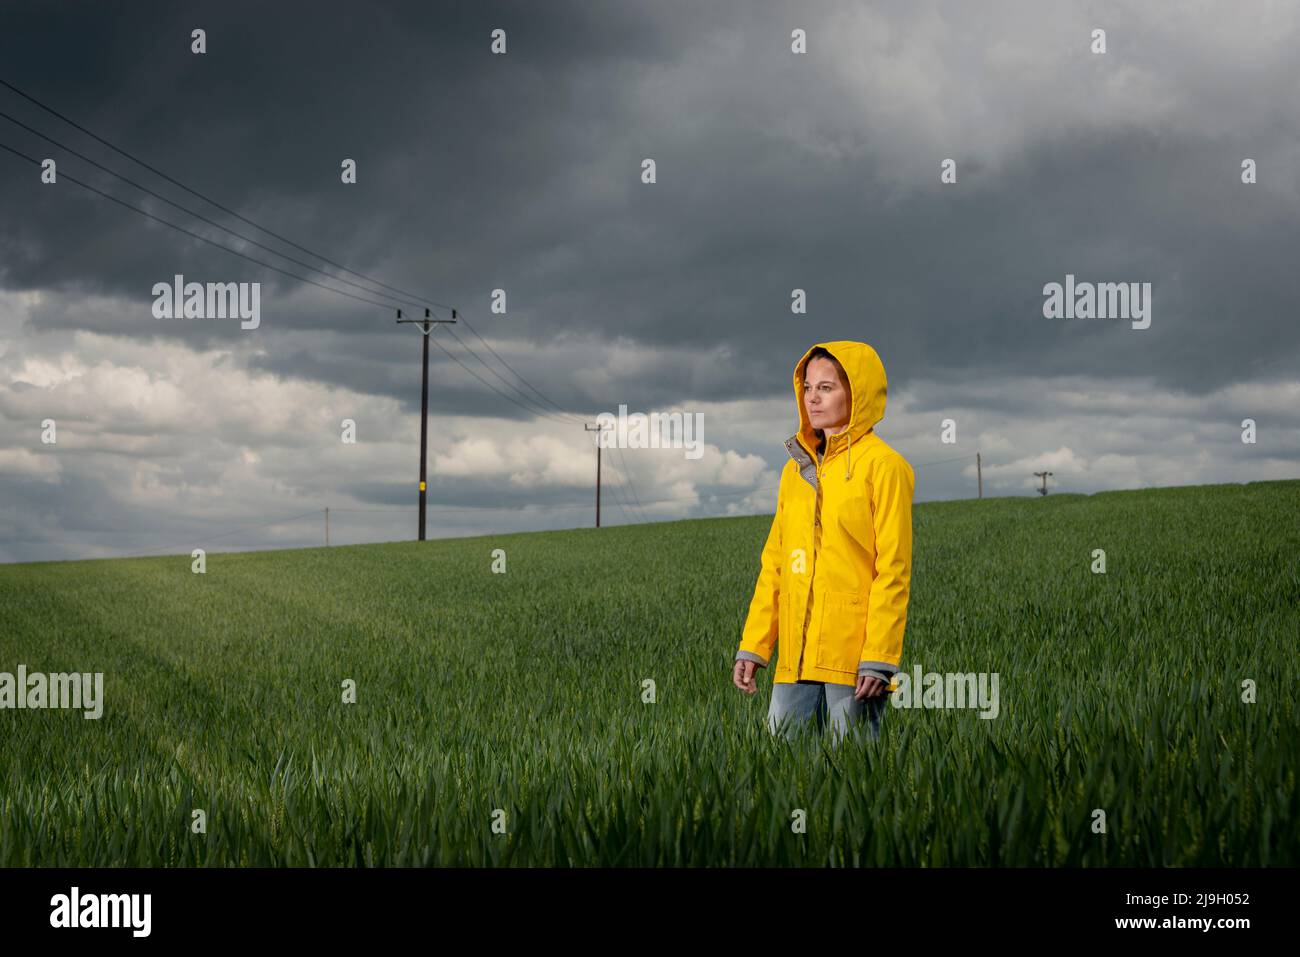 Woman wearing a yellow coat in a green field with a stormy sky background. Stock Photo